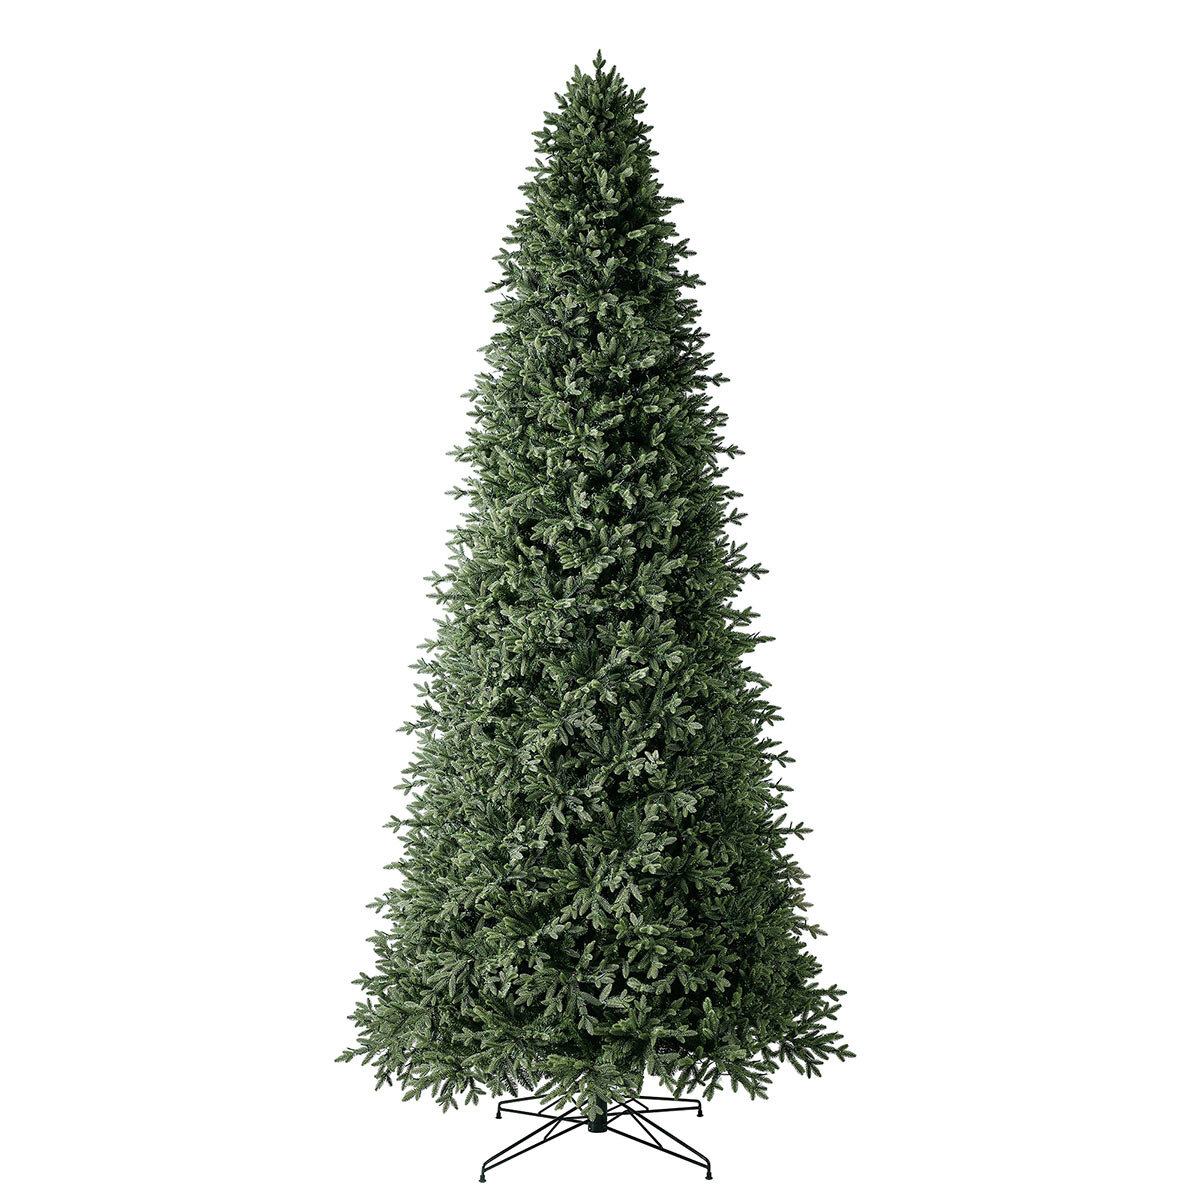 Buy 12' Pre-Lit Aspen Micro Dot LED Tree Overview Image at Costco.co.uk